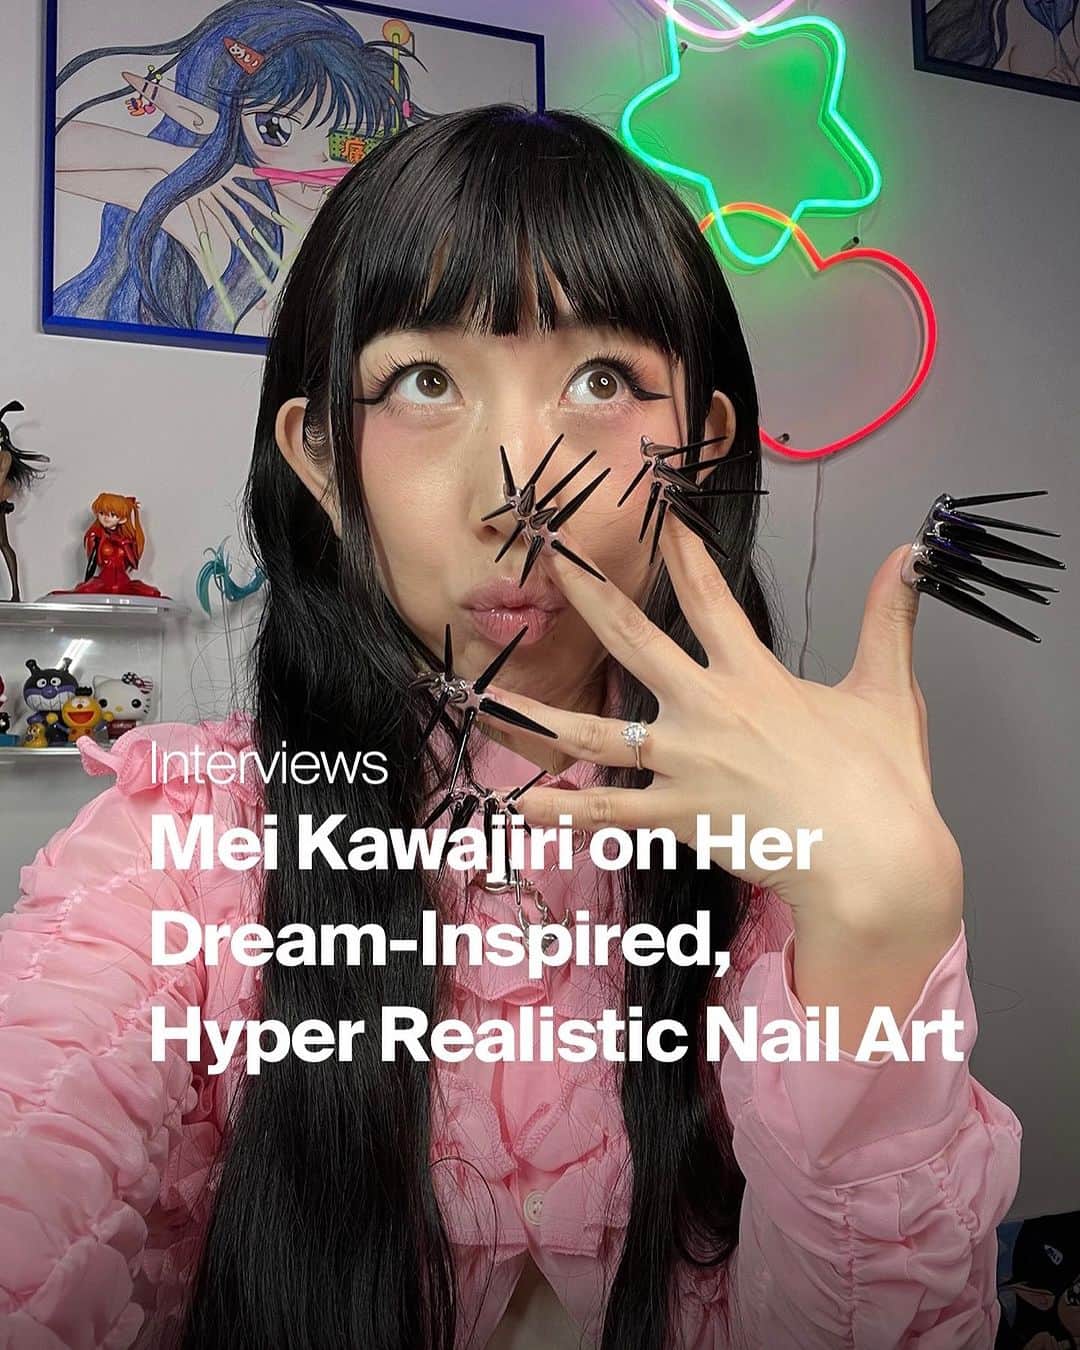 Mei Kawajiriのインスタグラム：「Japanese nail artist Mei Kawajiri @nailsbymei 💅 💗🎀gained her skills at a nail school in Kyoto, Japan 🇯🇵but it wasn’t until she went solo that she crafted her distinctive aesthetic of dream-inspired 💭creations, experimenting with unconventional materials like salt and false lashes. She set up her own salon in Japan before relocating to New York in 2012, where she’s since designed nail art for covers, editorials, and campaigns for brands like #MiuMiu, #MarcJacobs, and #AmericanVogue. 📸 Models.com spoke to the nail connoisseur on her perspective on beauty, what she looking forward to while pregnant, and her definition of success. Click the link in the bio for more! ✨👀  🖊 @anire_ikomi  @nailsbymei 💖💚💜 Thank you @13marketmanagement 🙏✨✨😍」